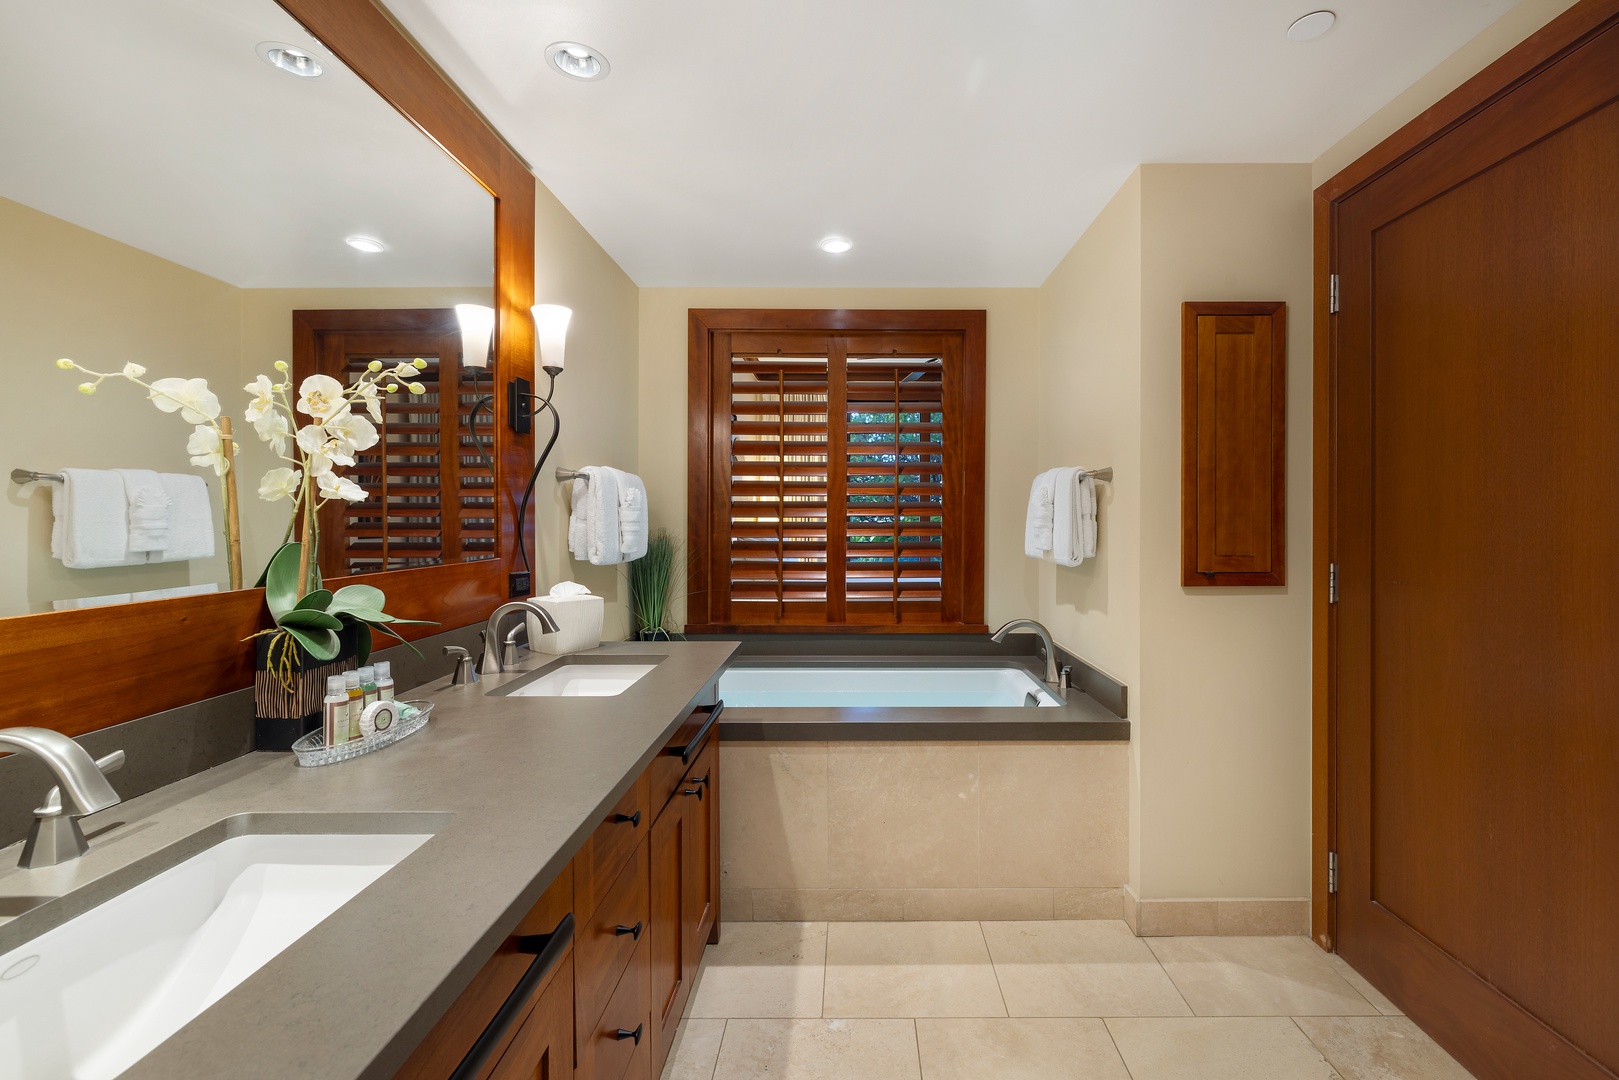 Kapolei Vacation Rentals, Ko Olina Beach Villas B107 - The primary guest bathroom with a luxurious soaking tub.